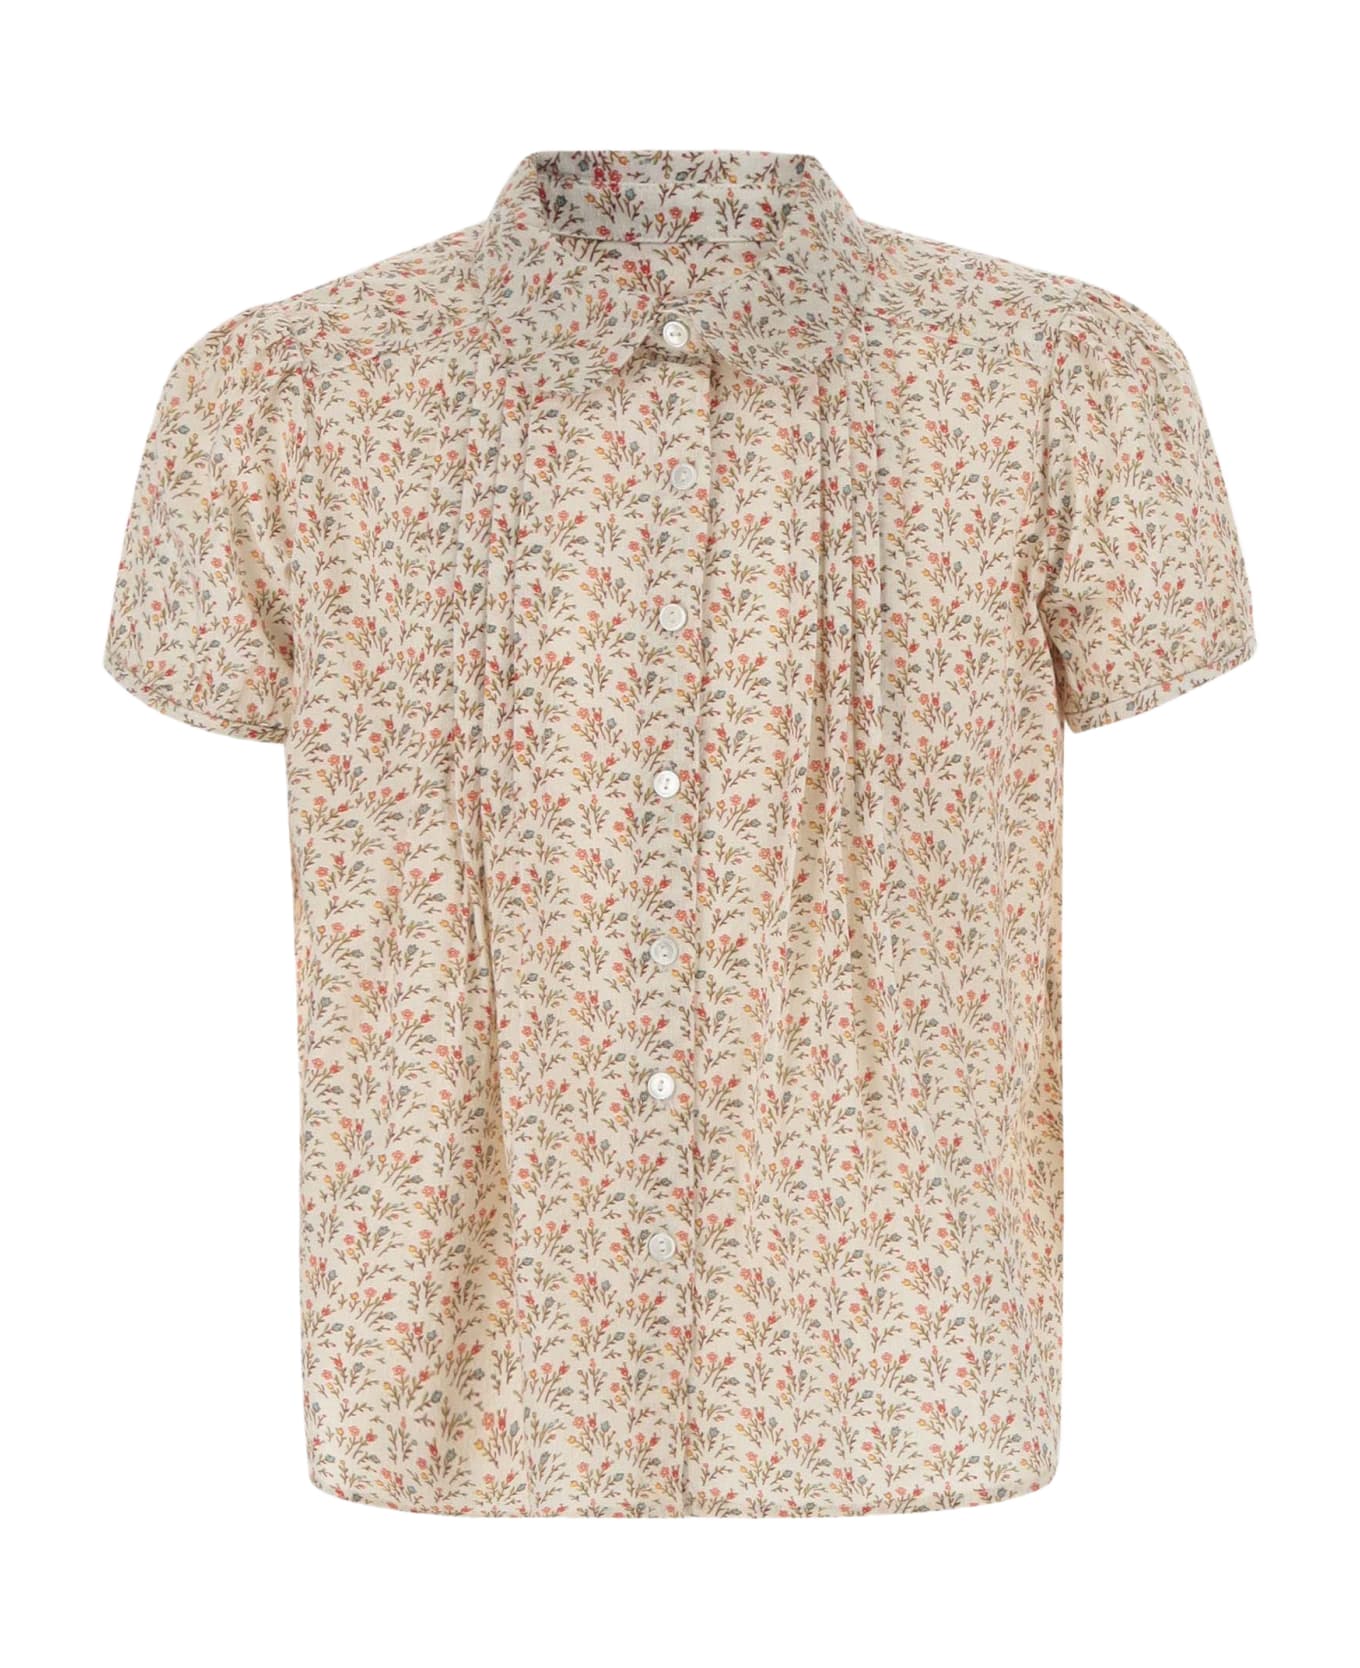 Bonpoint Cotton Shirt With Floral Pattern - Red シャツ